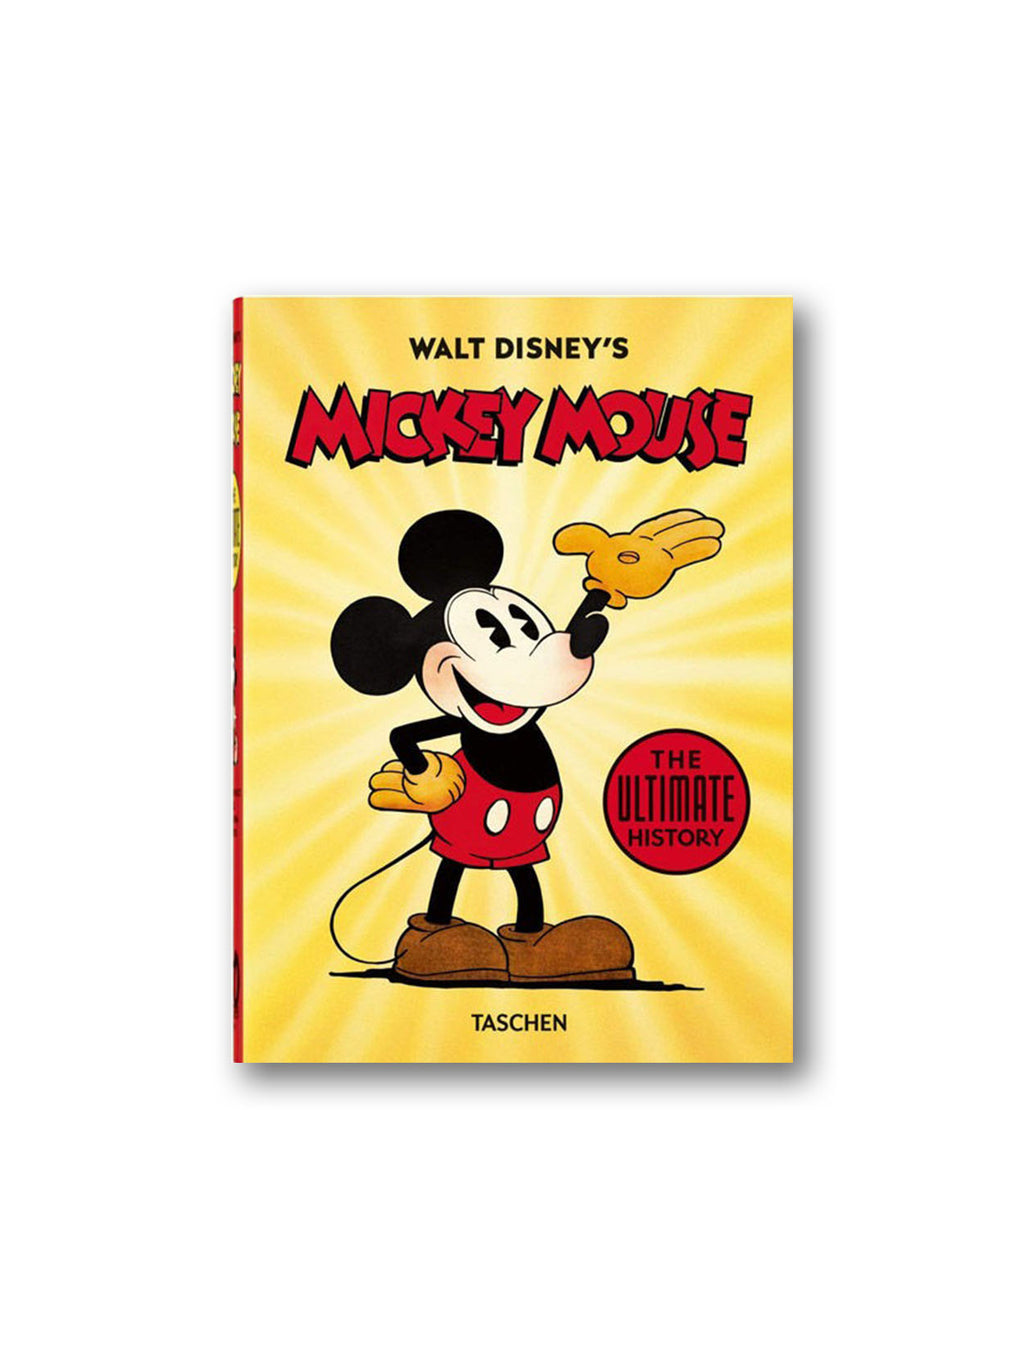 Walt Disney's Mickey Mouse - The Ultimate History - 40th Anniversary Edition